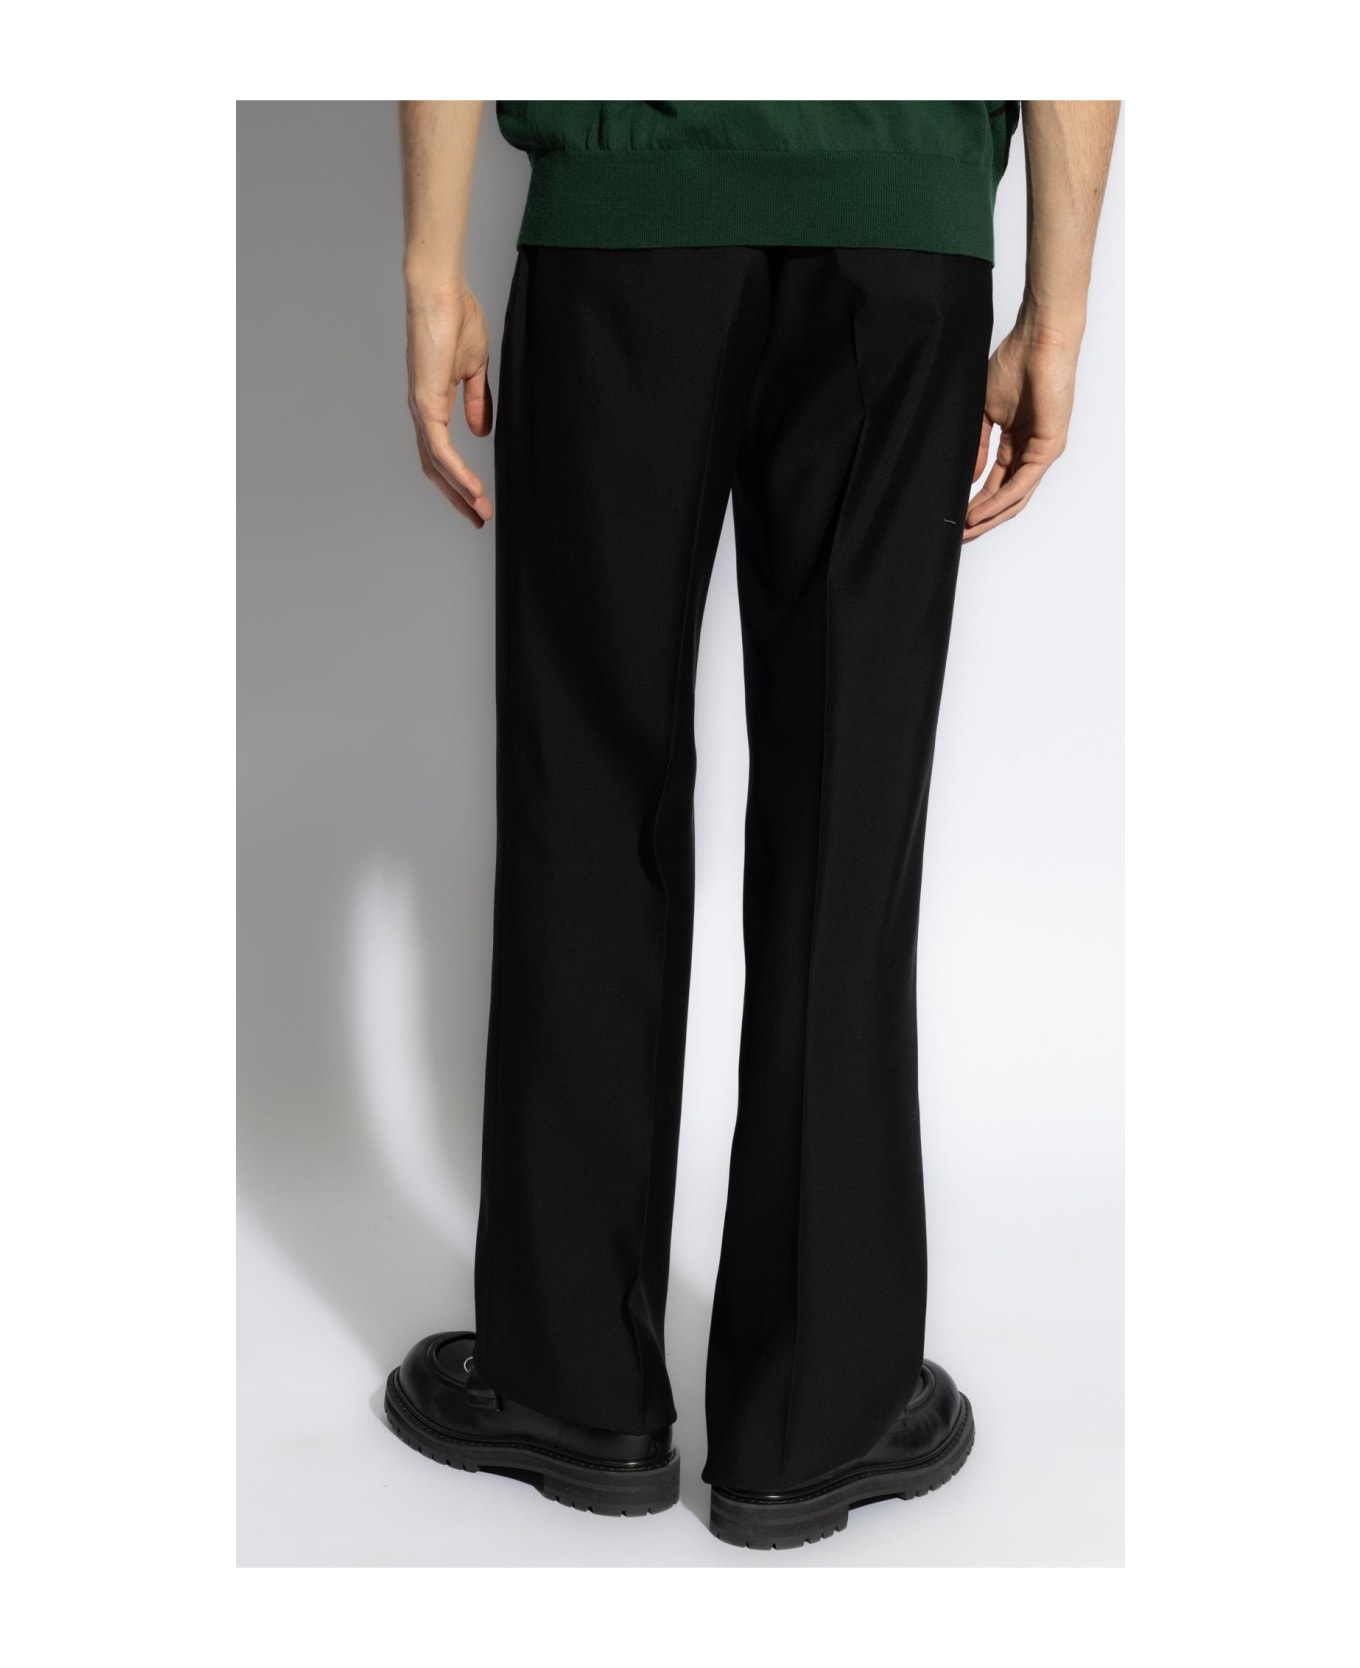 Burberry Pleat-front Trousers - BLACK